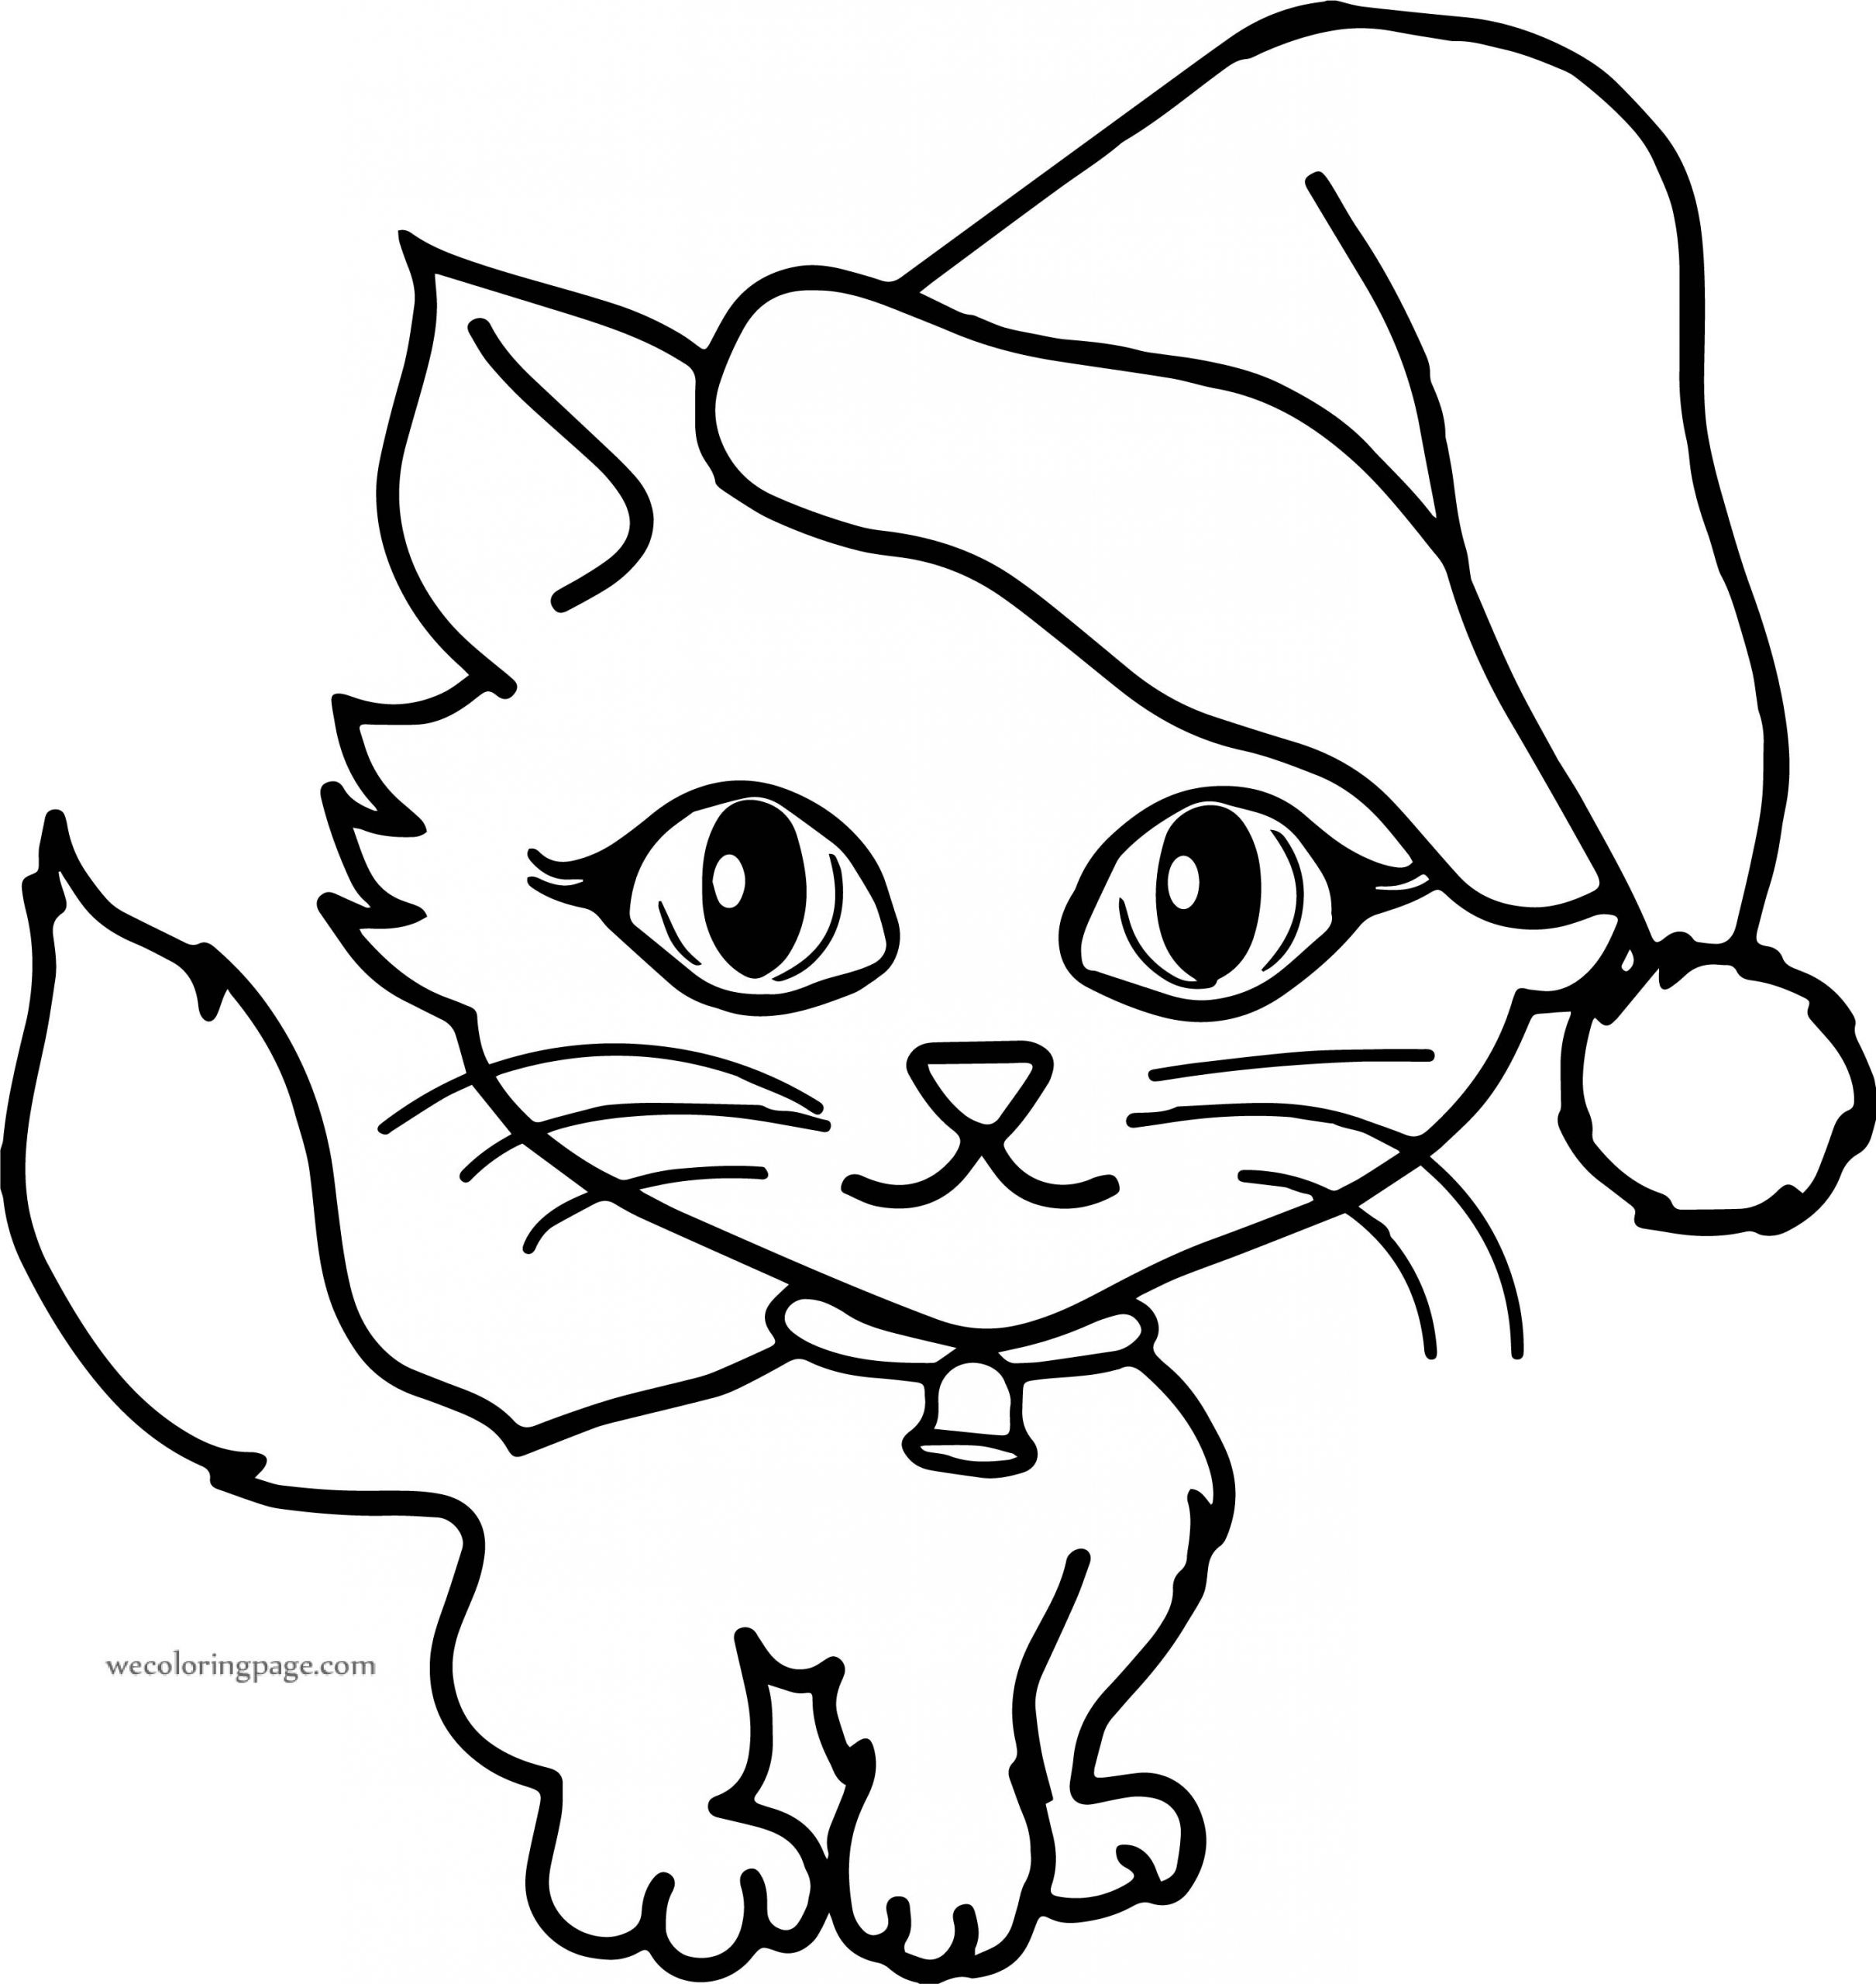 Girls Christmas Coloring Pages
 Christmas Girl Cat Coloring Page